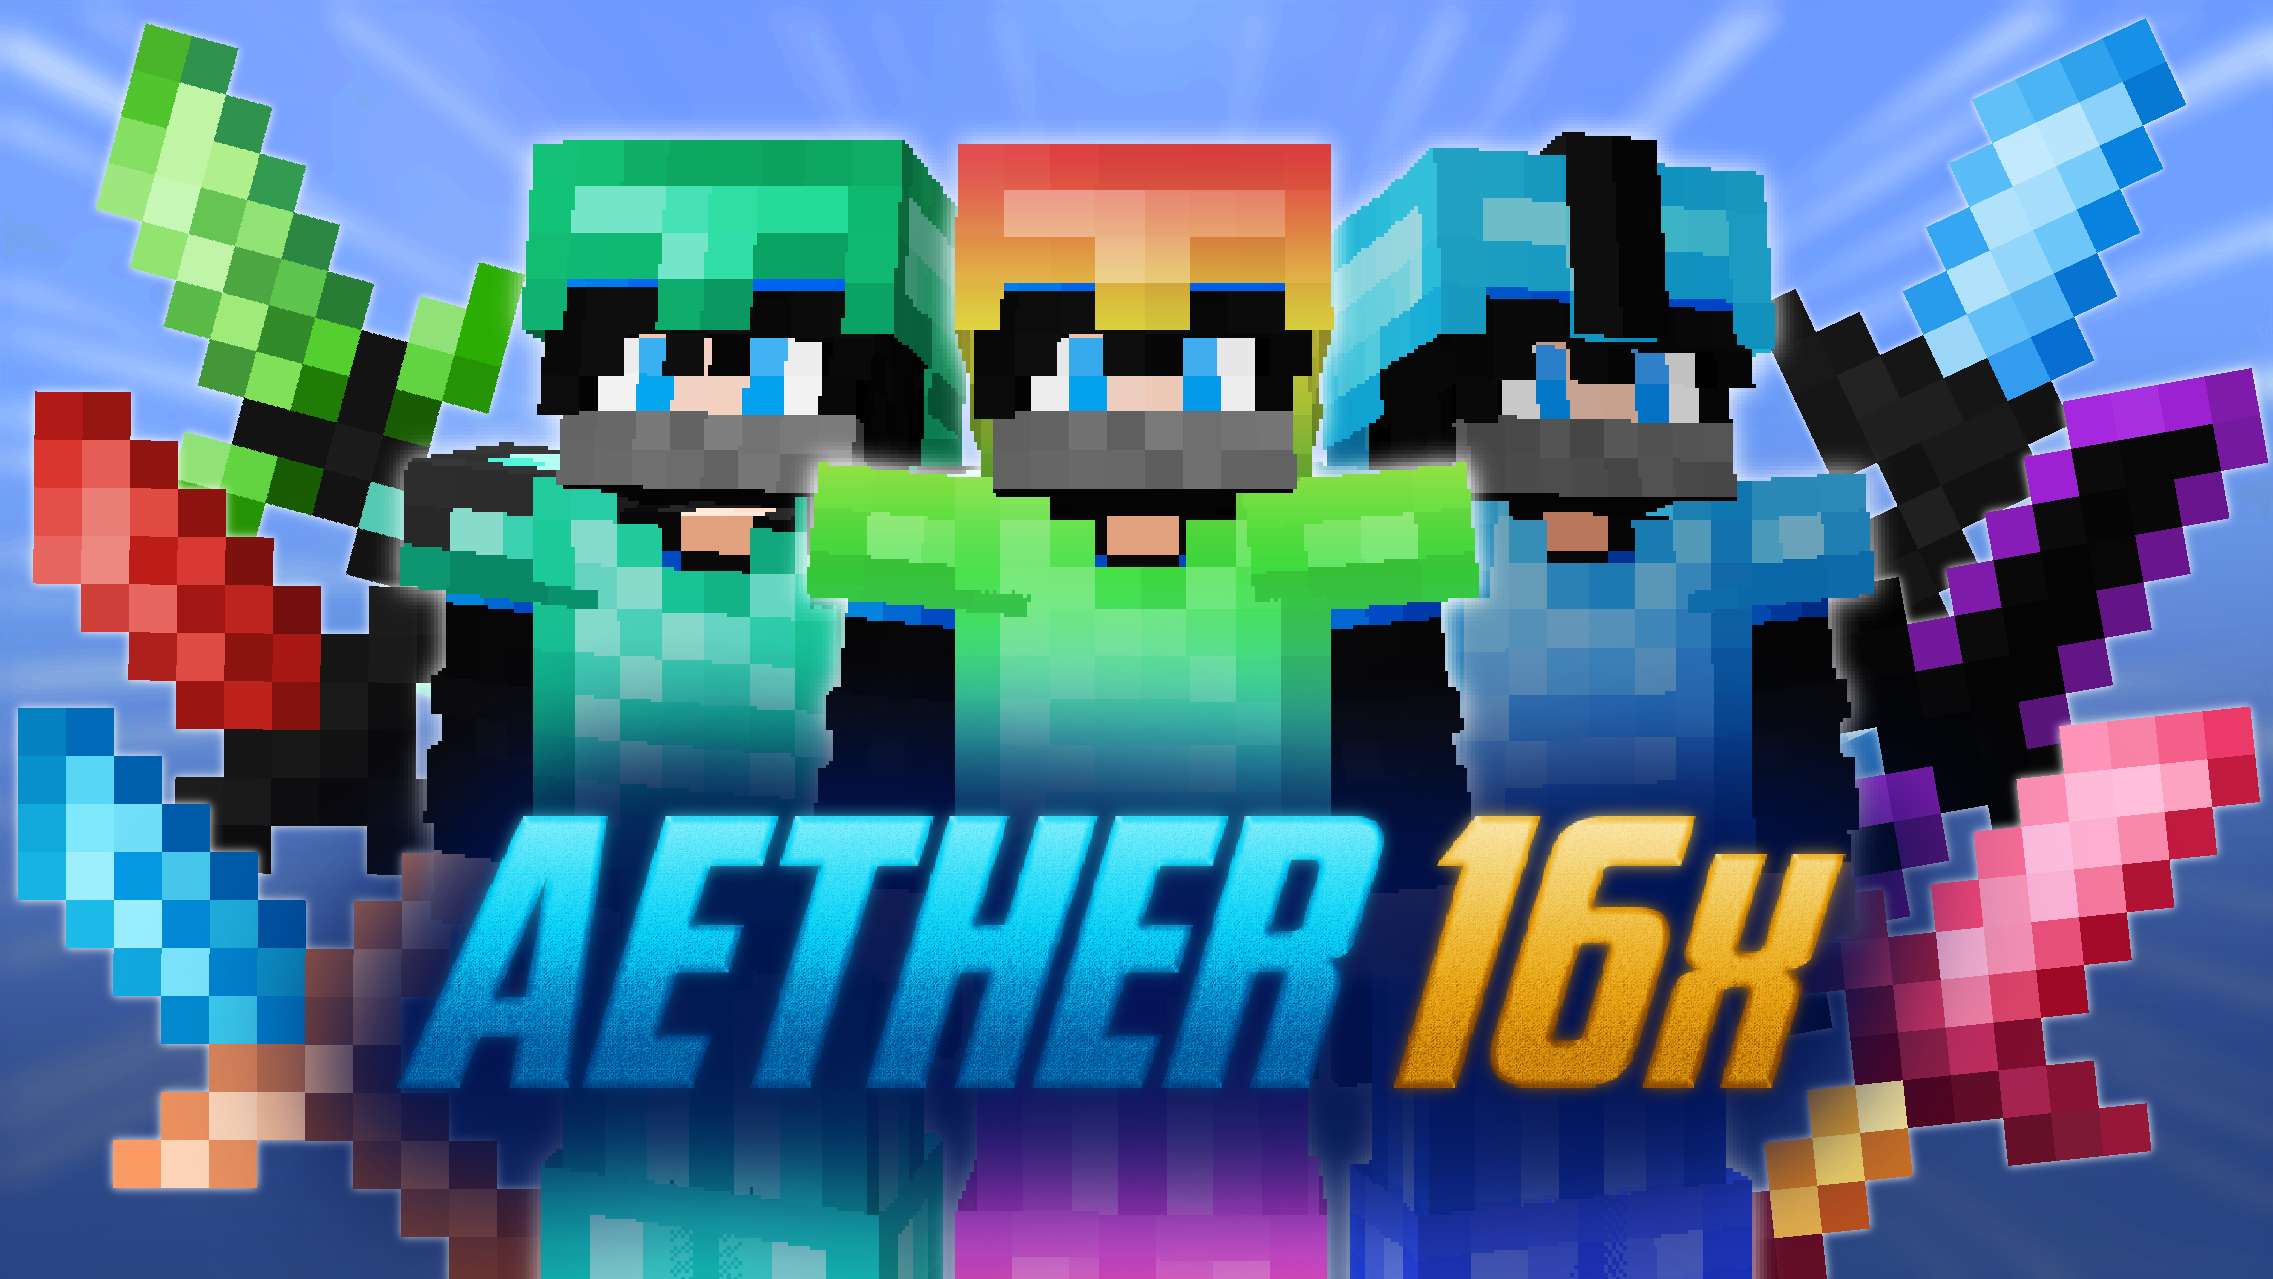 Aether 16x [SpecularPotato] 16x by Mqryo on PvPRP